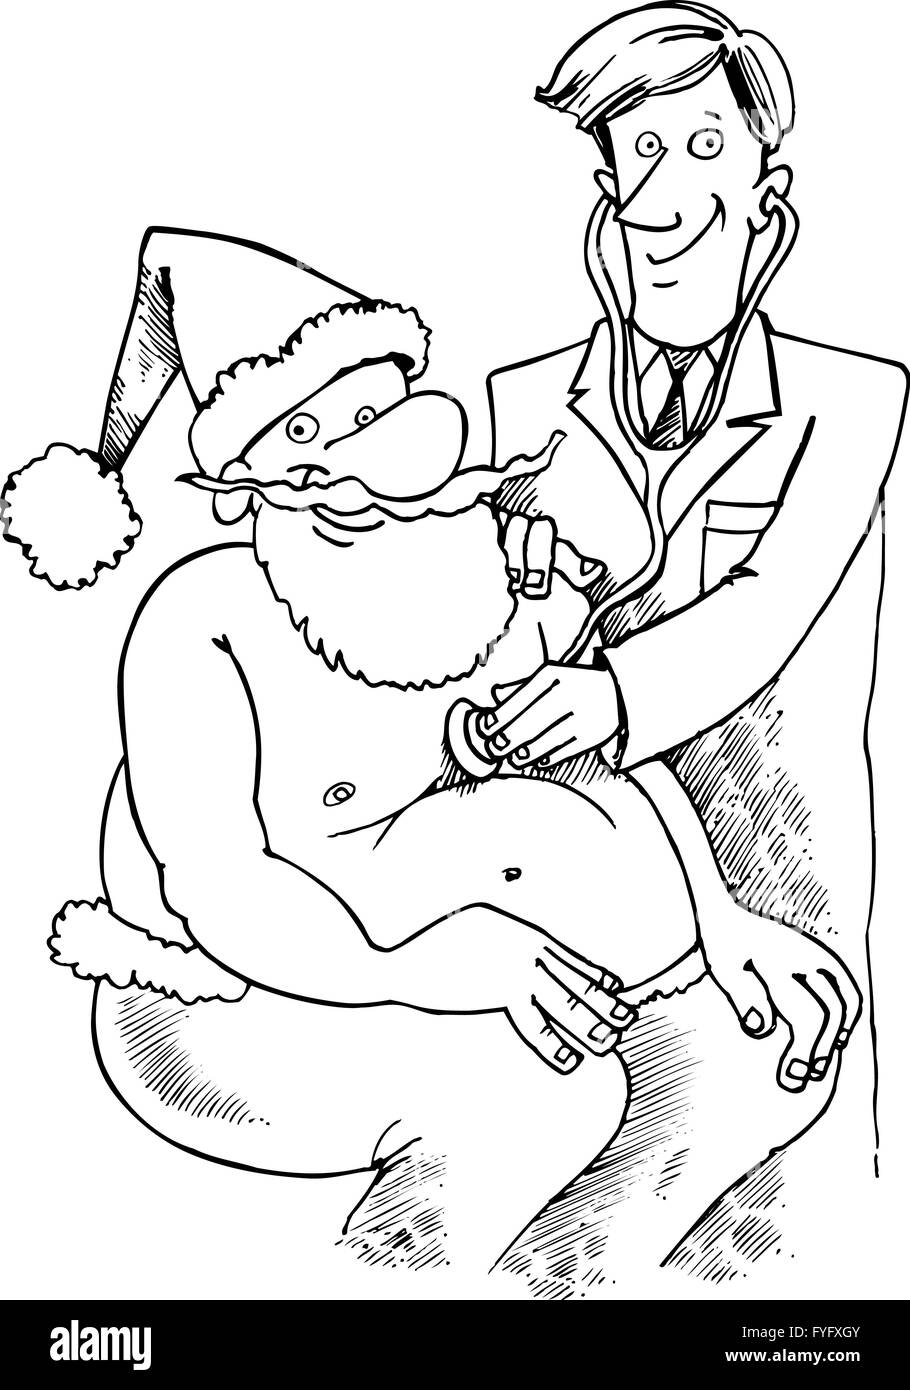 santa at doctor for coloring book Stock Photo